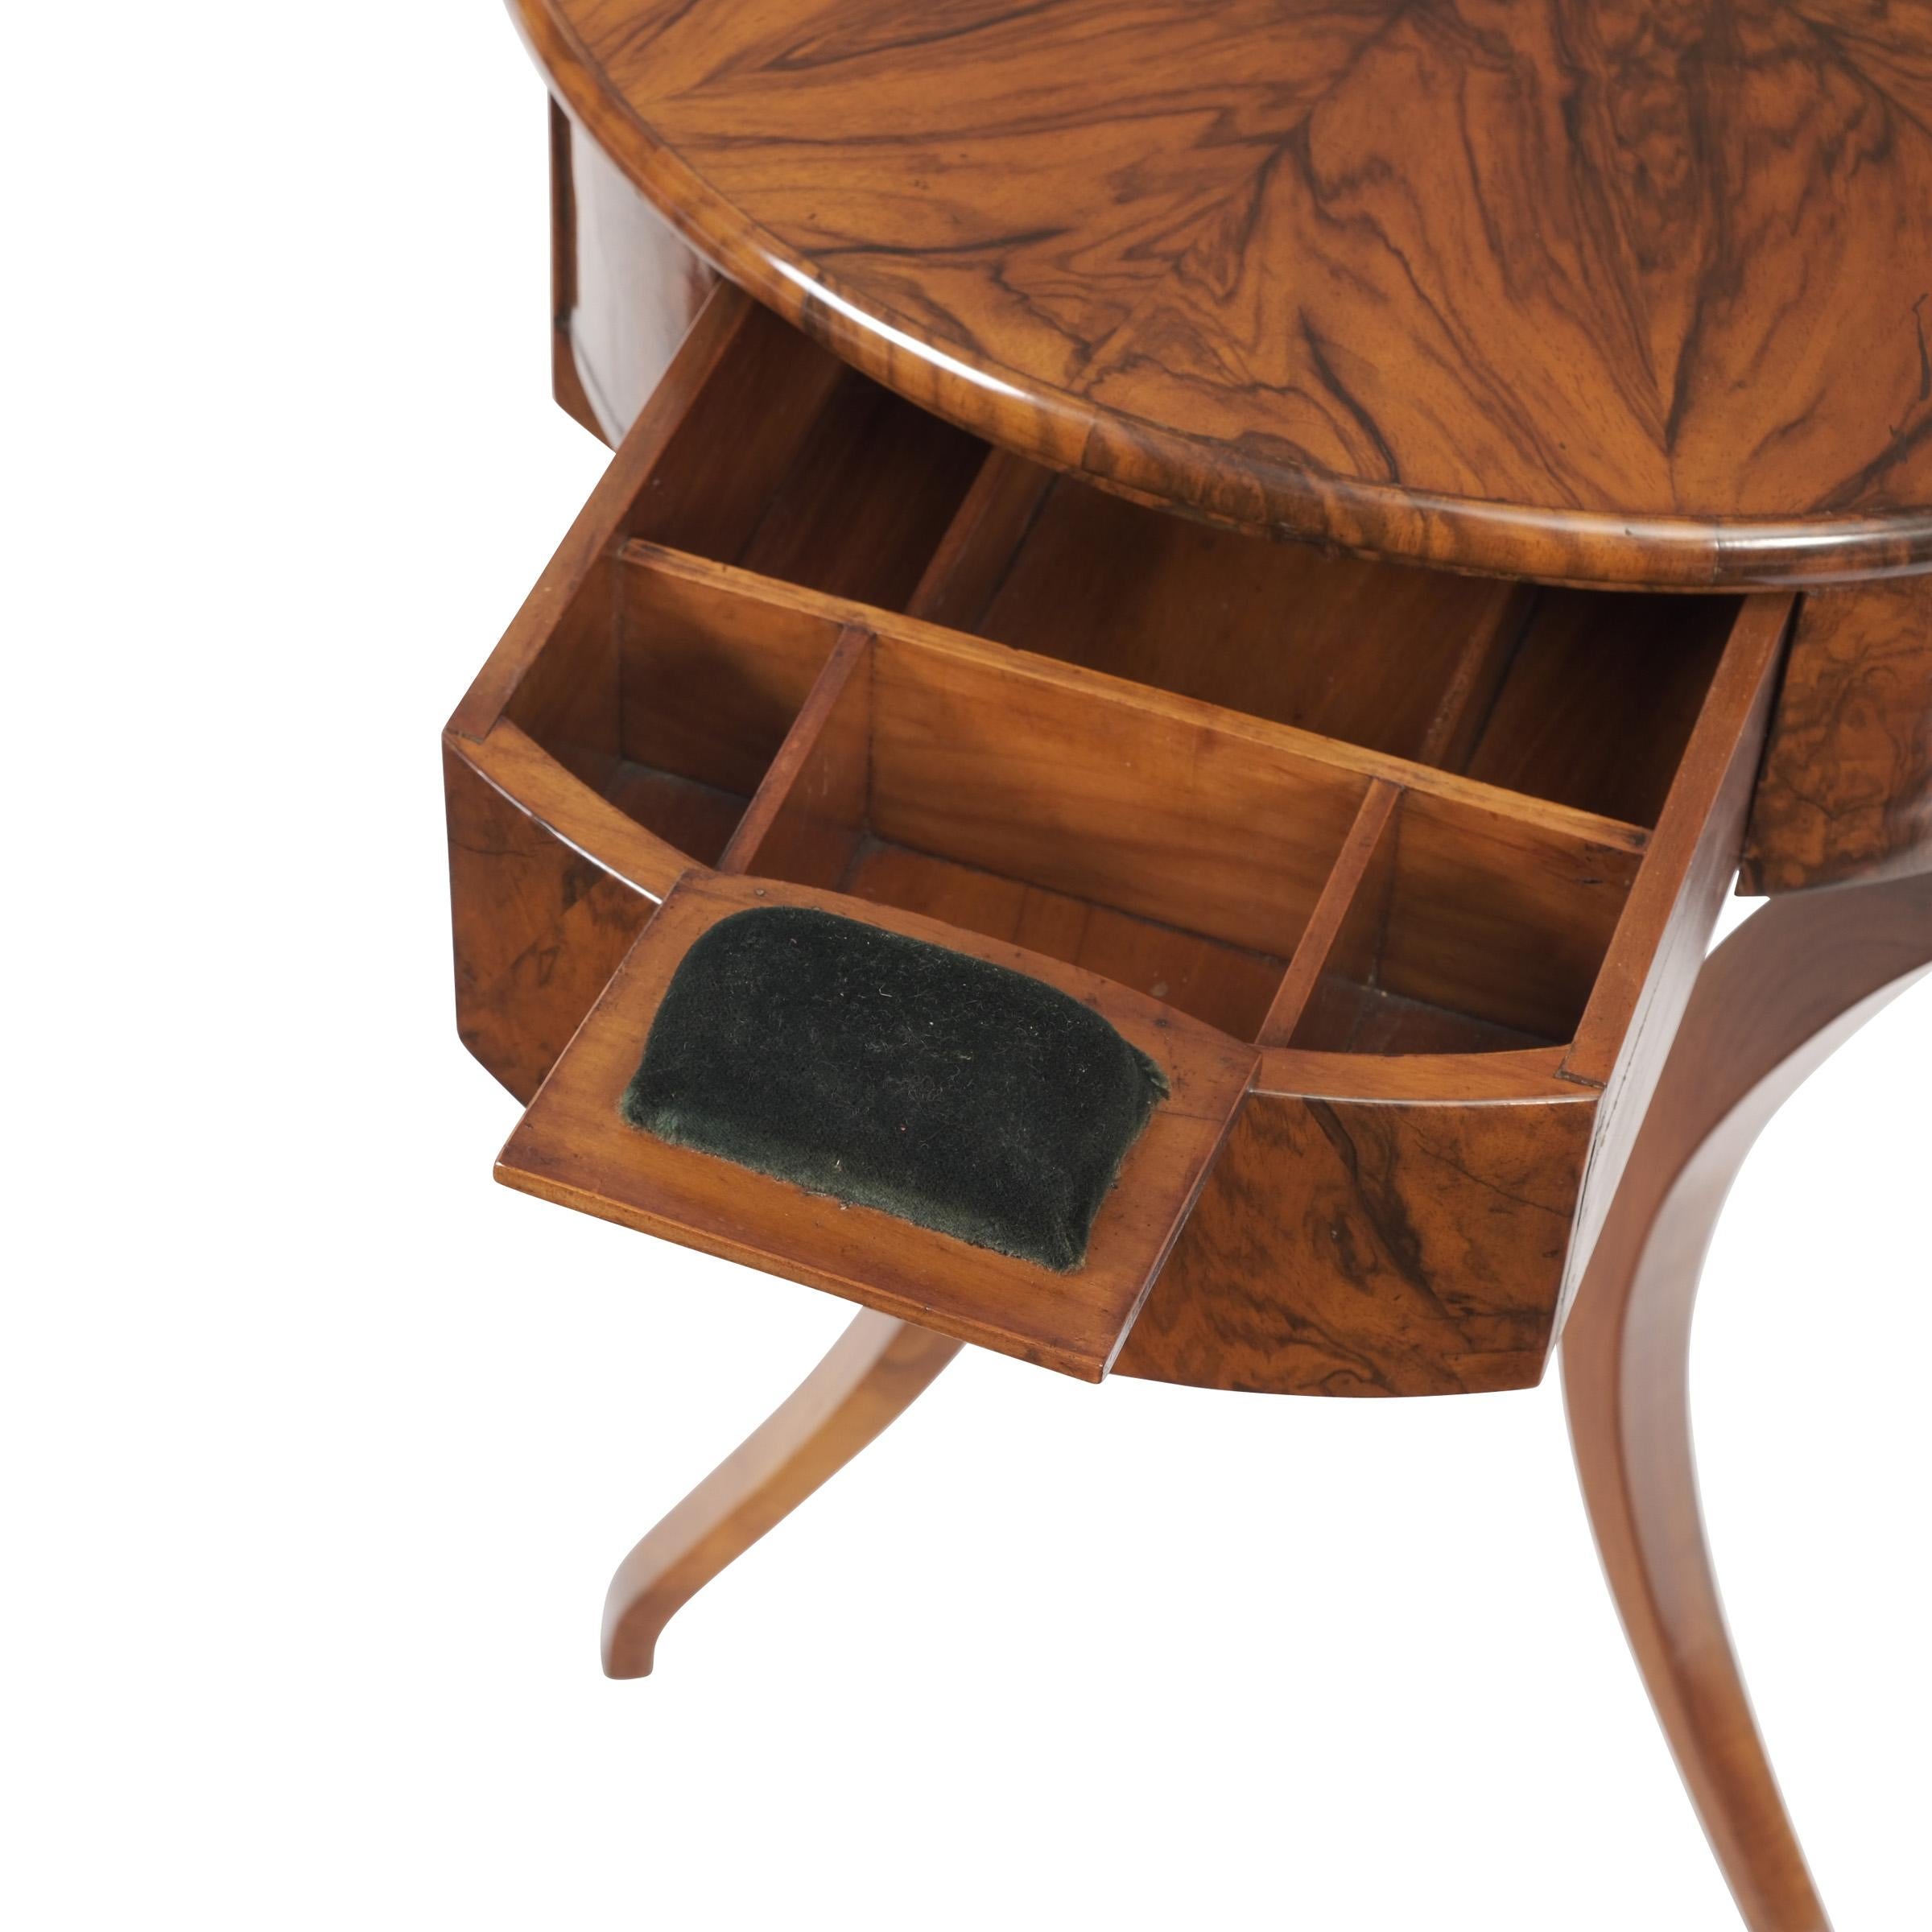 19th Century round Biedermeier Sewing Side Table Walnut and Walnut Root Veneer In Good Condition For Sale In Münster, DE